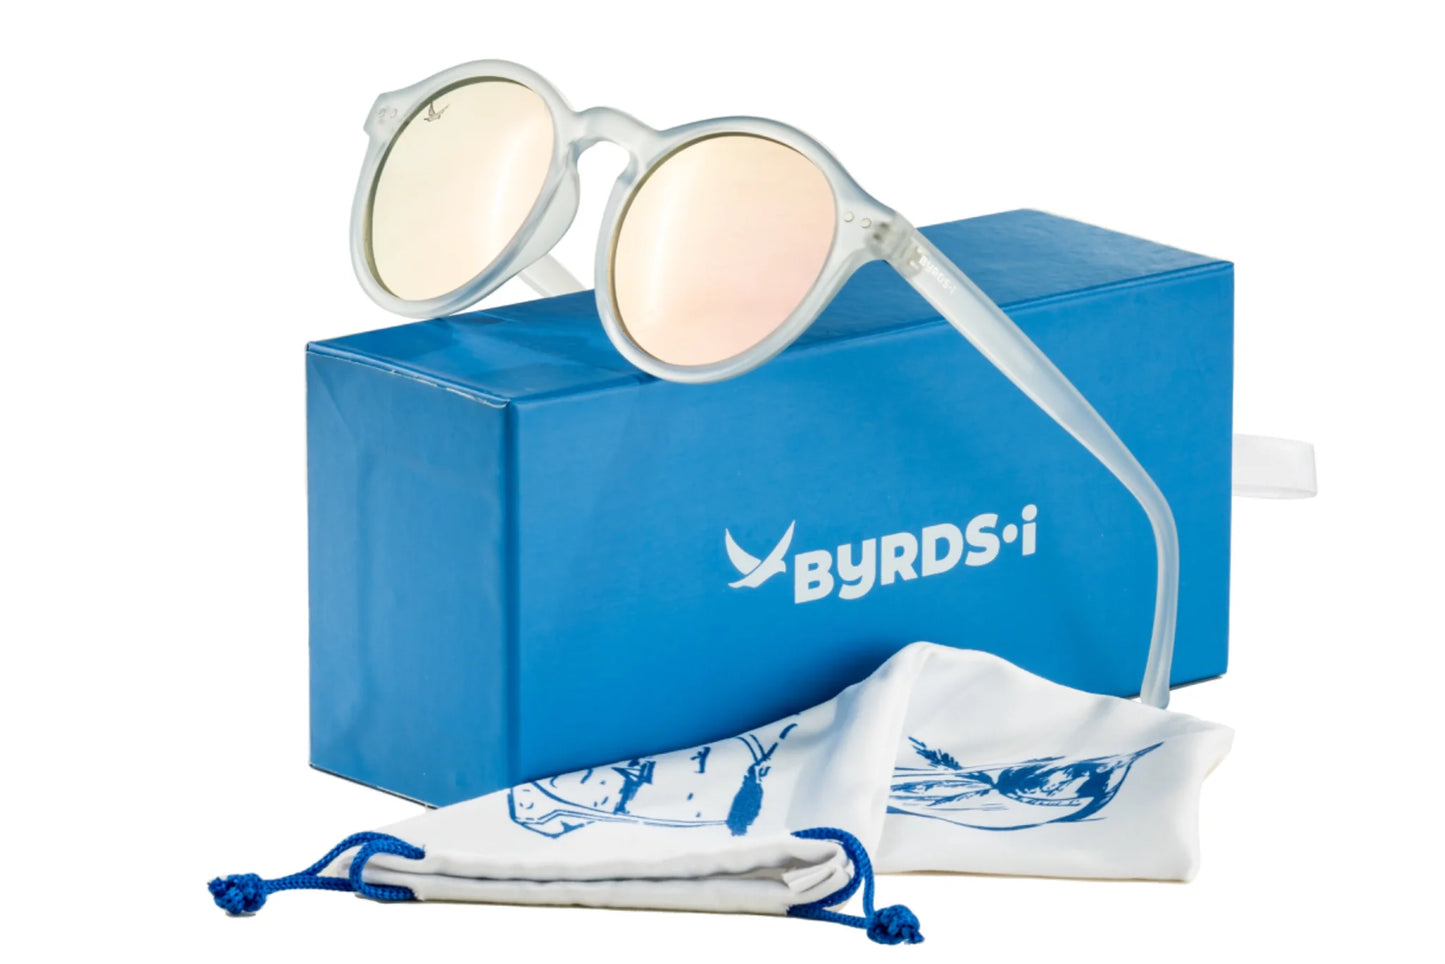 These round, gender-neutral specs offer polarized and UV400-protected lenses for some extra-sunny days this spring/summer. Lightweight and lovely (we know you don't want to feel weighed down during those gorgeous beachy days)